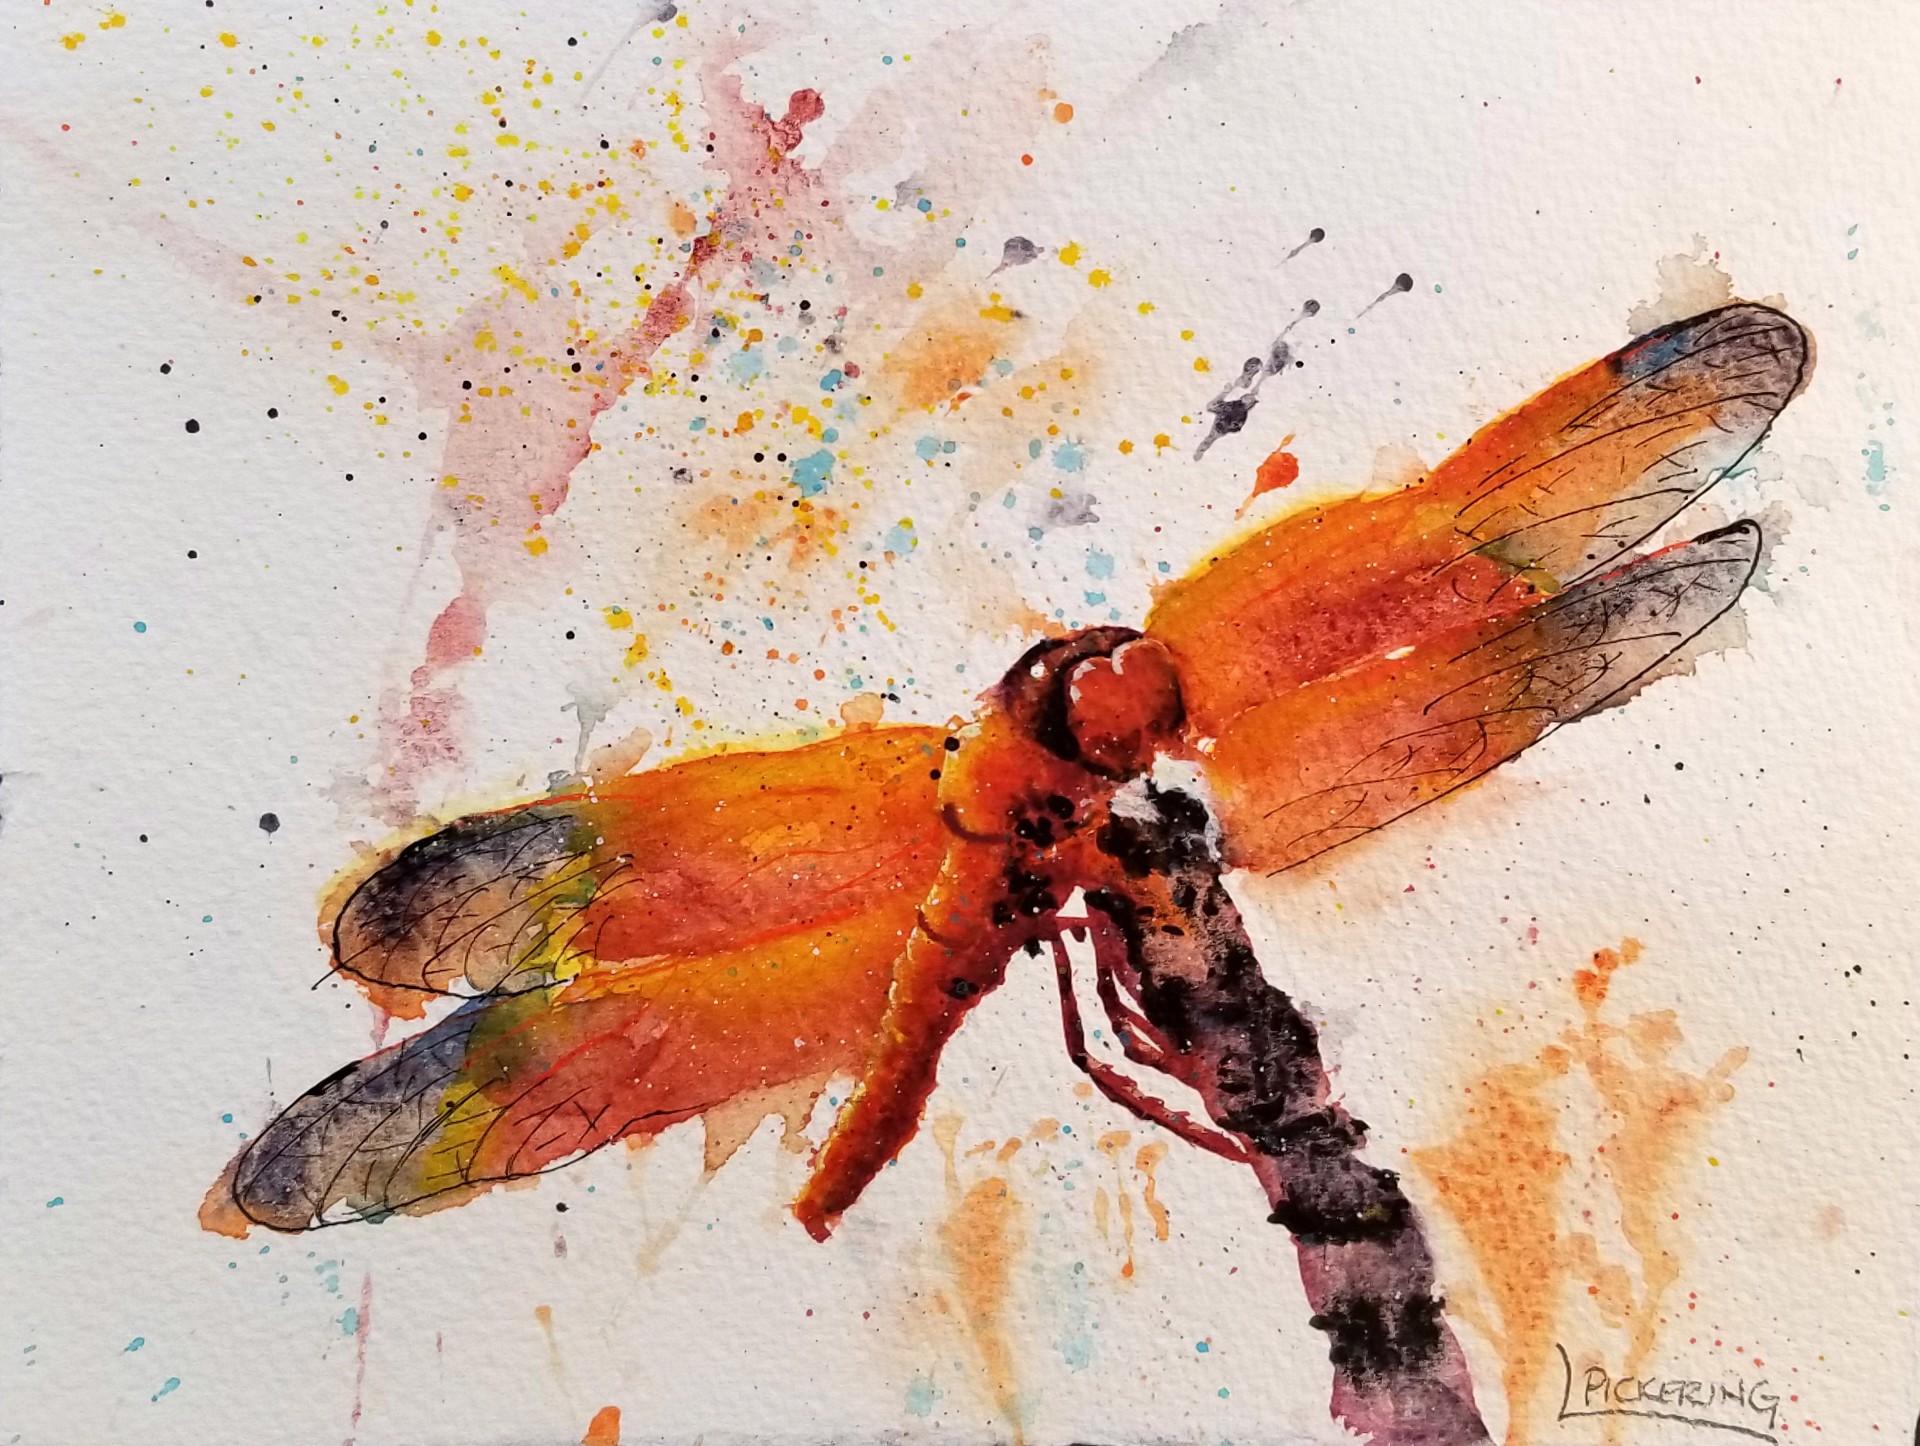 Dragonfly Rest by Laura Pickering